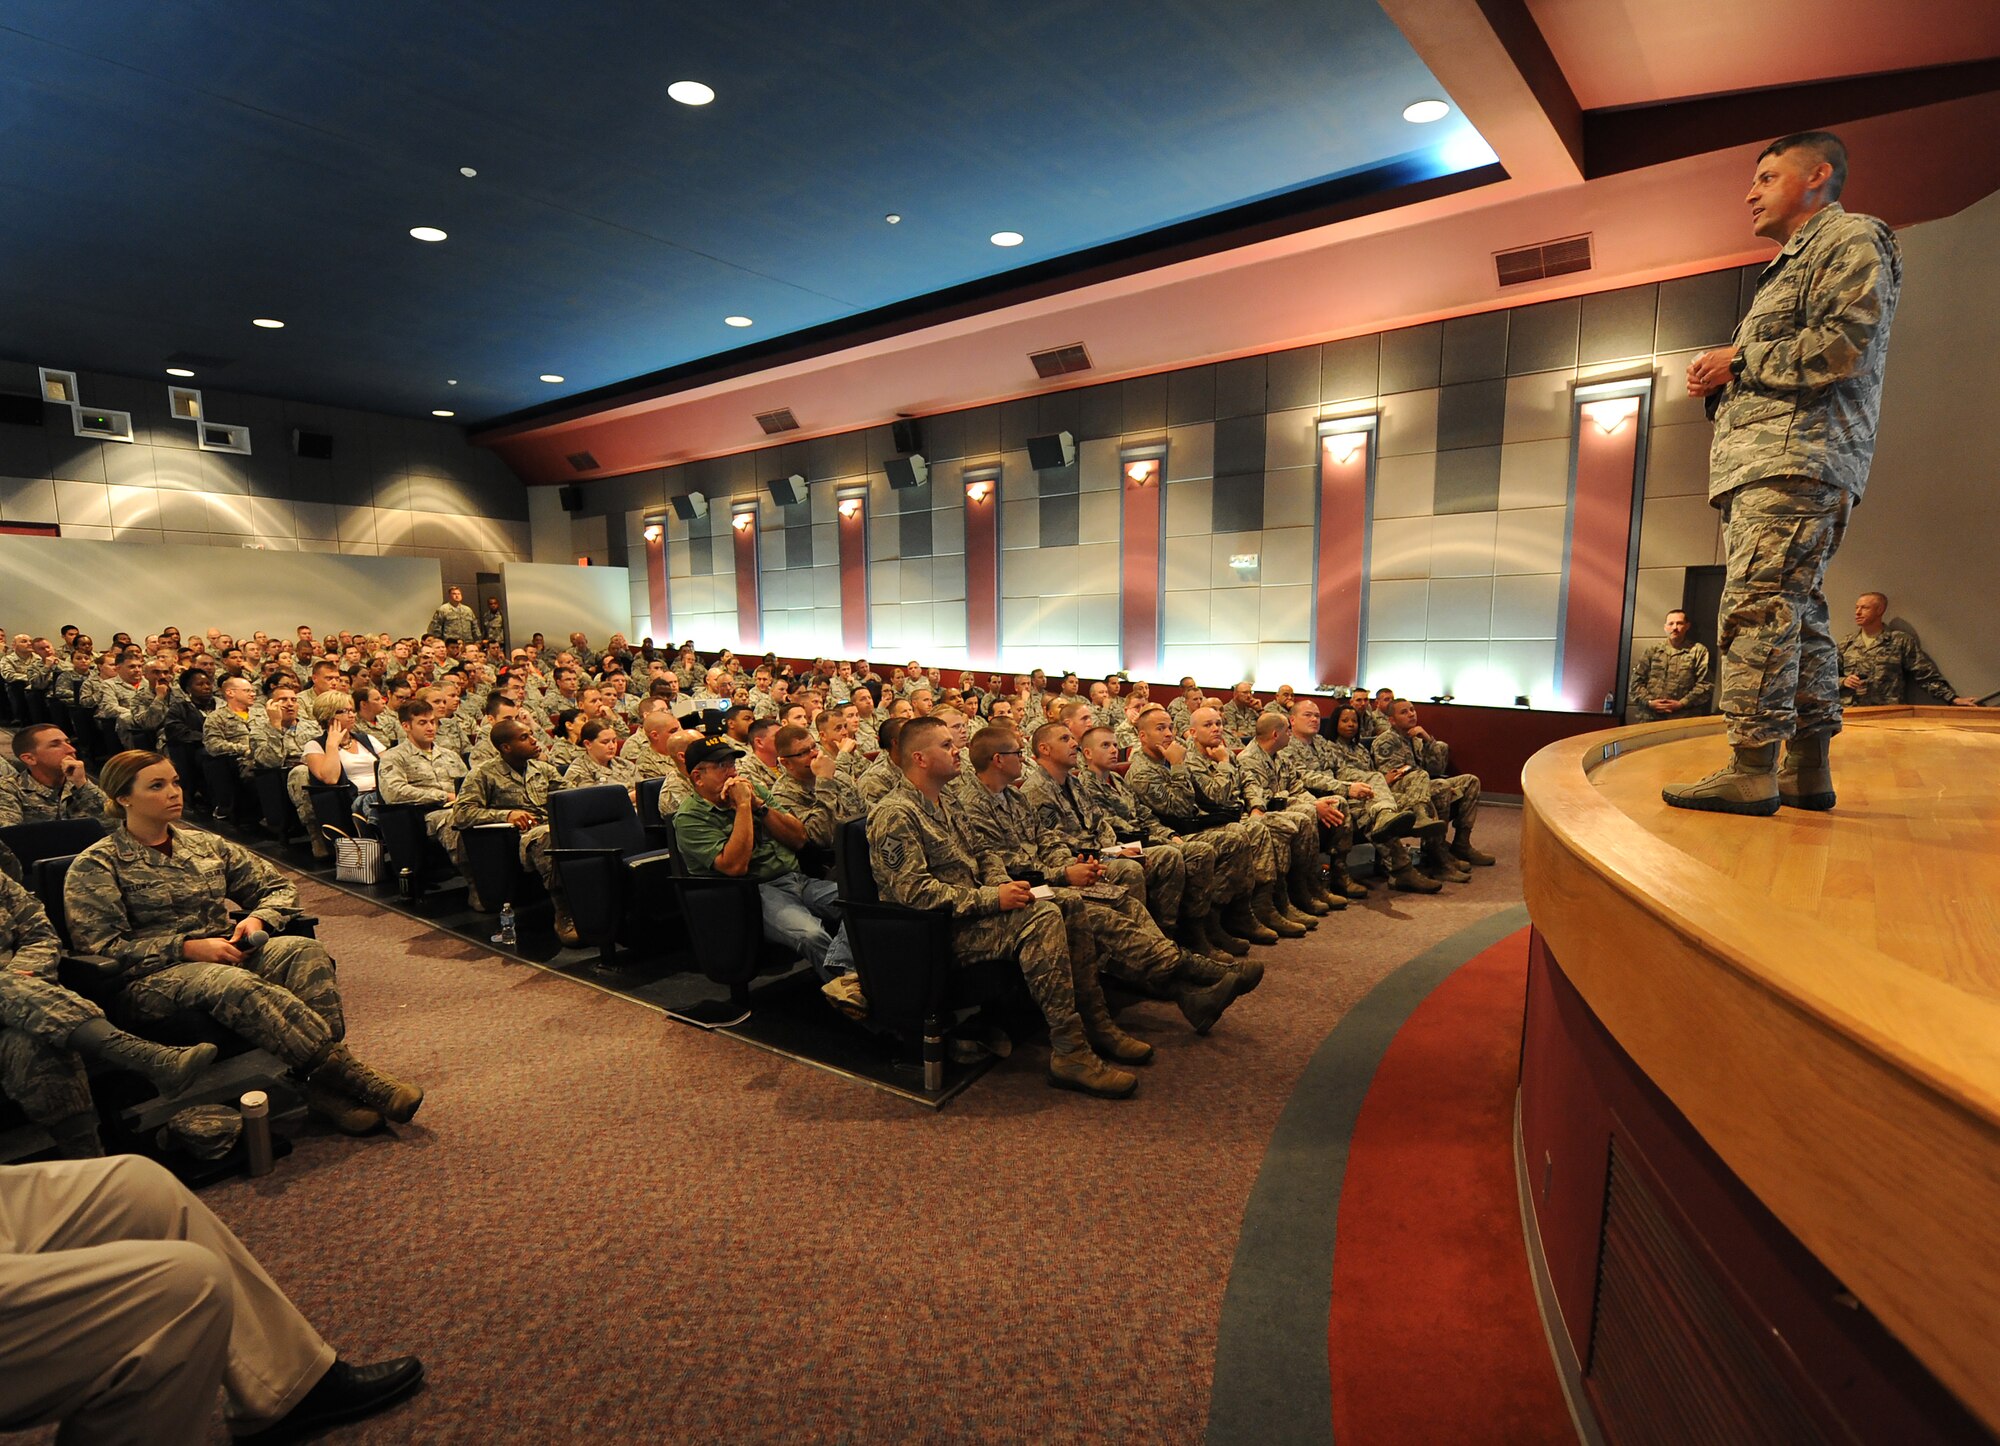 Airmen attend a briefing at Whiteman Air Force Base, Mo., June 26, 2015, about the new changes in the Enlisted Evaluation System and Weighted Airman Promotion System. The briefing is also scheduled for other bases to inform Airmen of upcoming changes. (U.S. Air Force photo by Airman 1st Class Michaela R. Slanchik/Released)